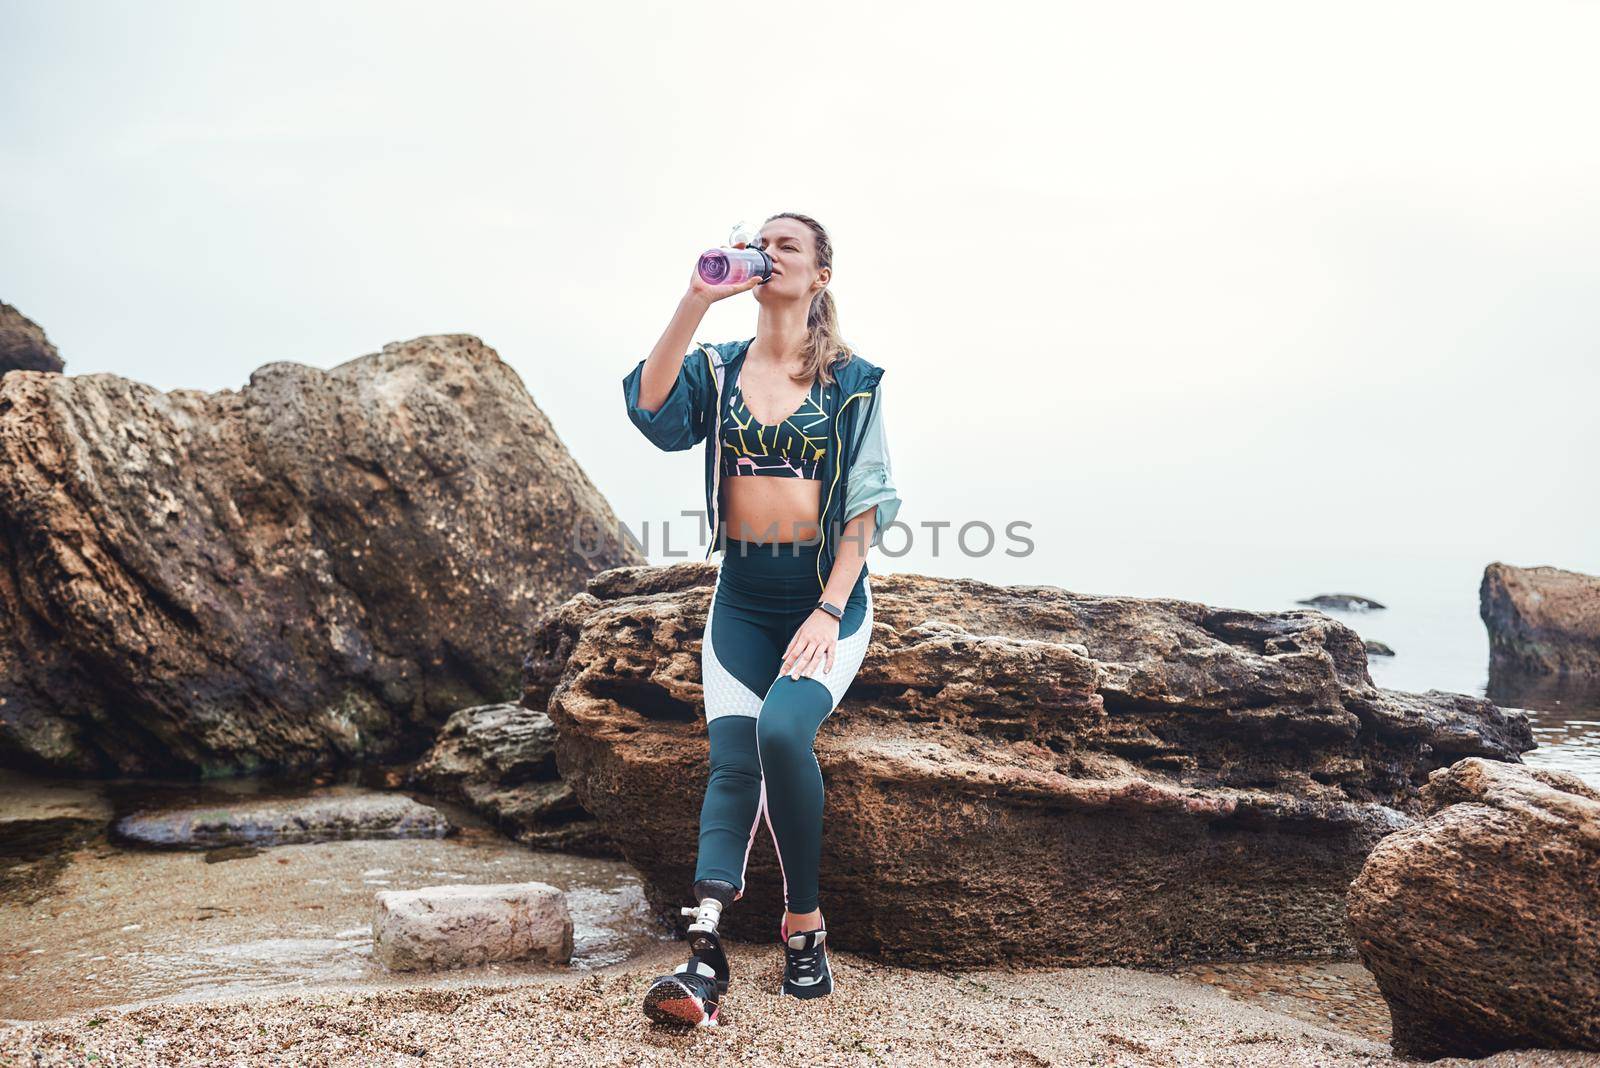 Taking a break. Tired disabled athlete woman with prosthetic leg drinking water while sitting on the stone at the beach. Disabled Sportsman. Motivation. Sport concept. Break concept